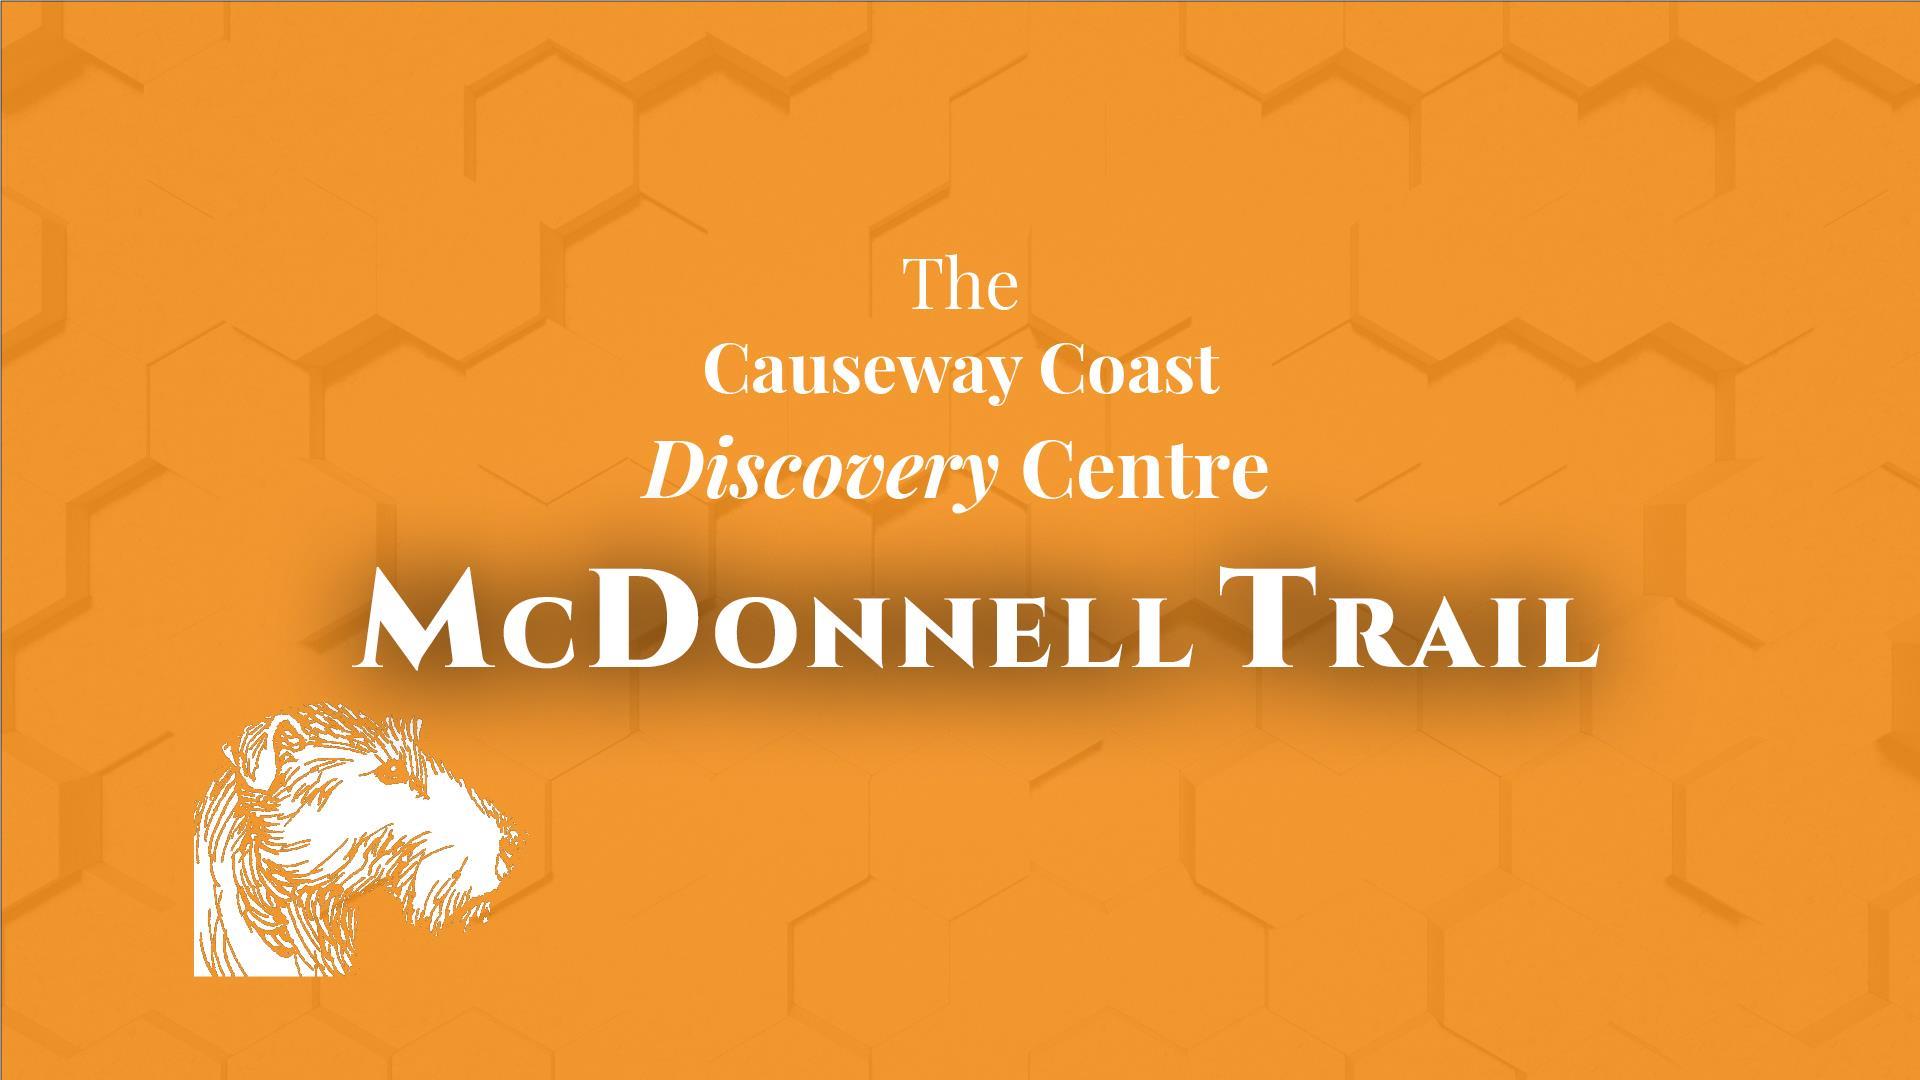 The McDonnell Trail Centre